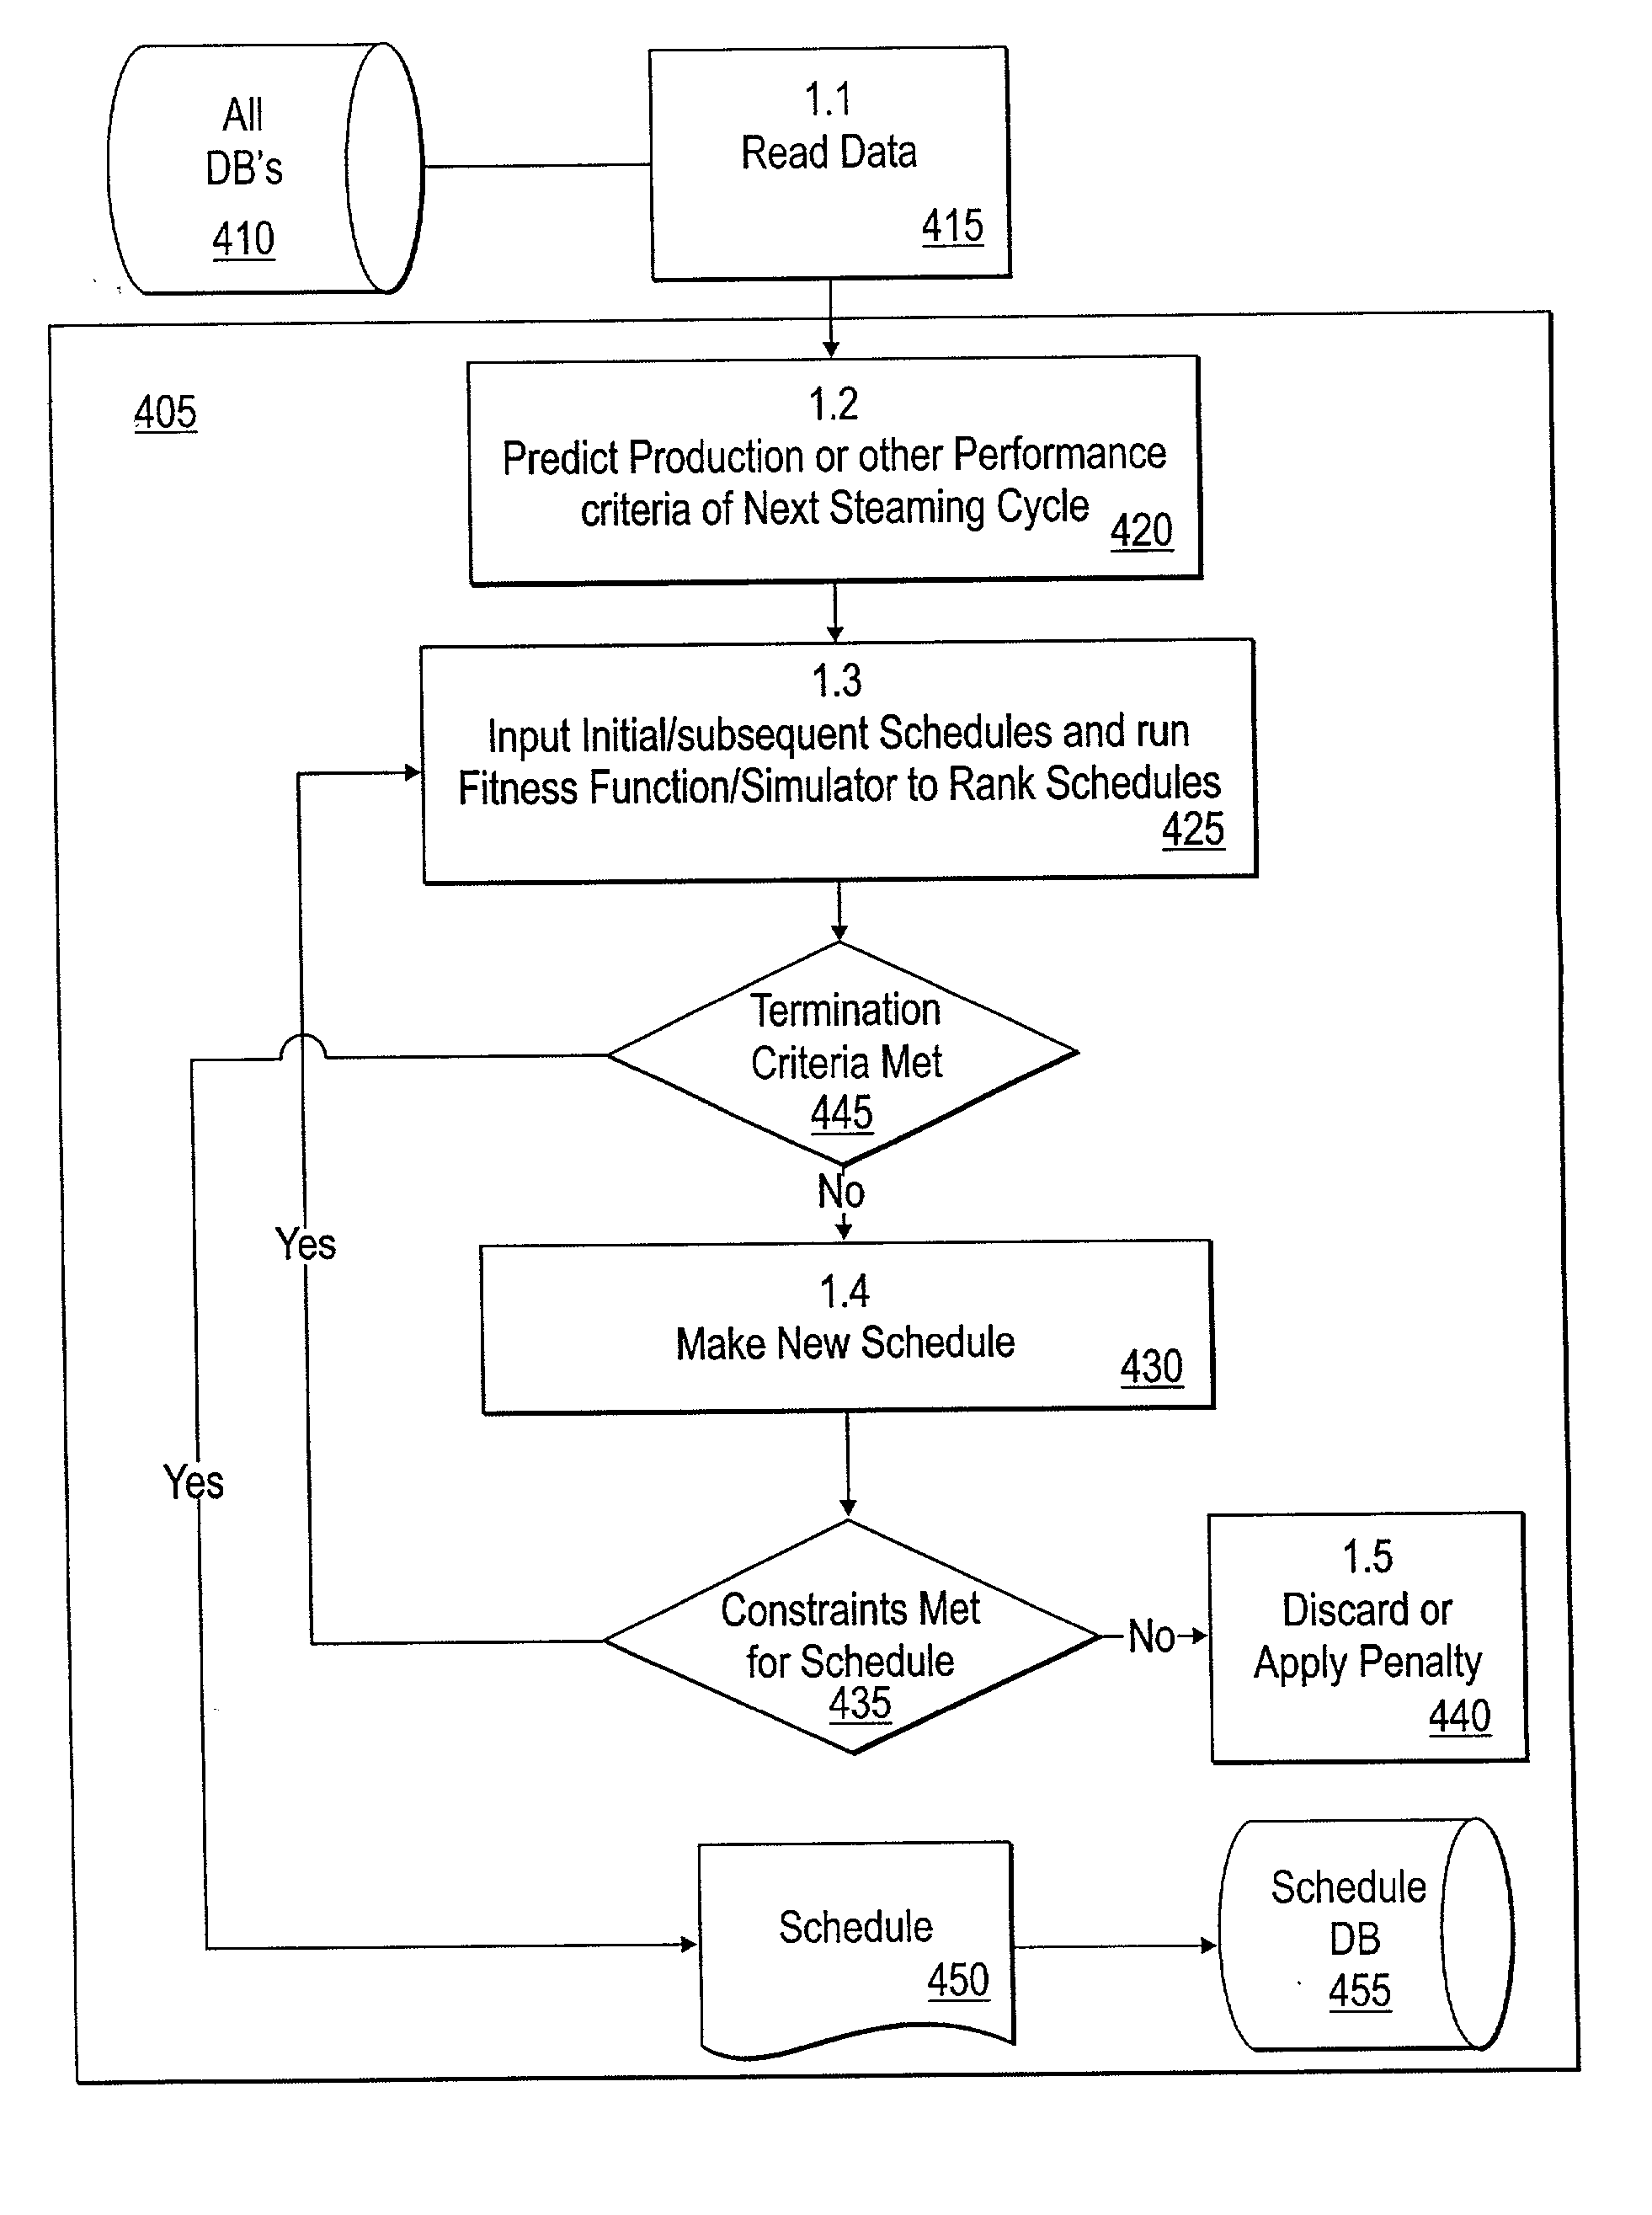 System and method for scheduling cyclic steaming of wells